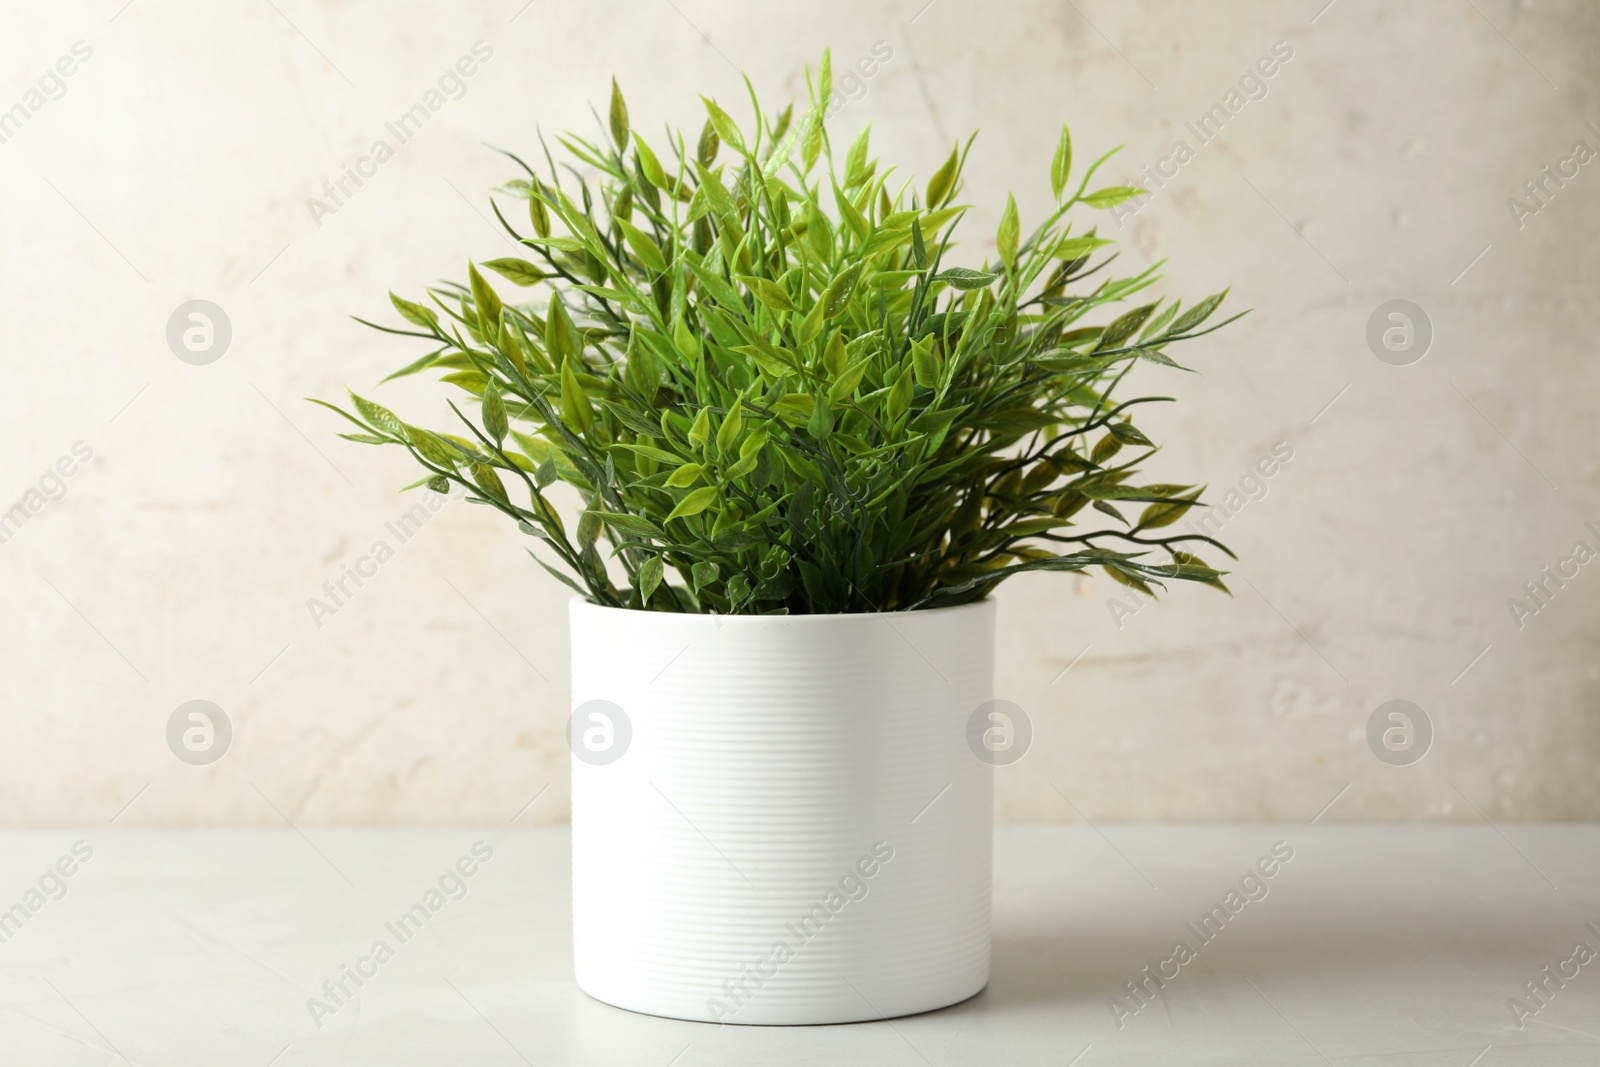 Photo of Artificial plant in white flower pot on table against light background